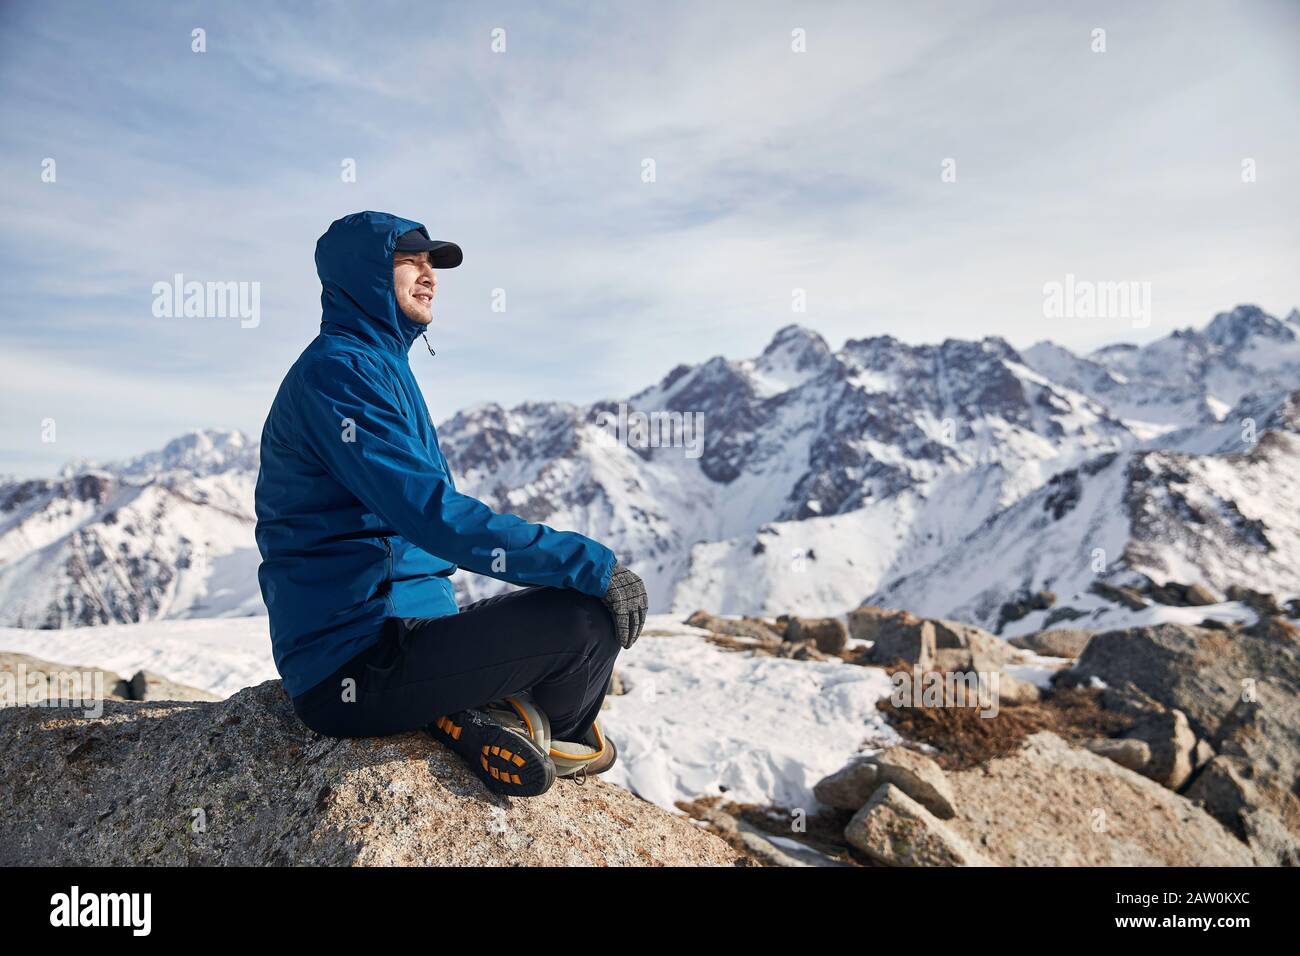 Portrait of happy Asian climber in blue jacket at high snowy mountains at background. Outdoor climbing and mountaineering concept. Stock Photo